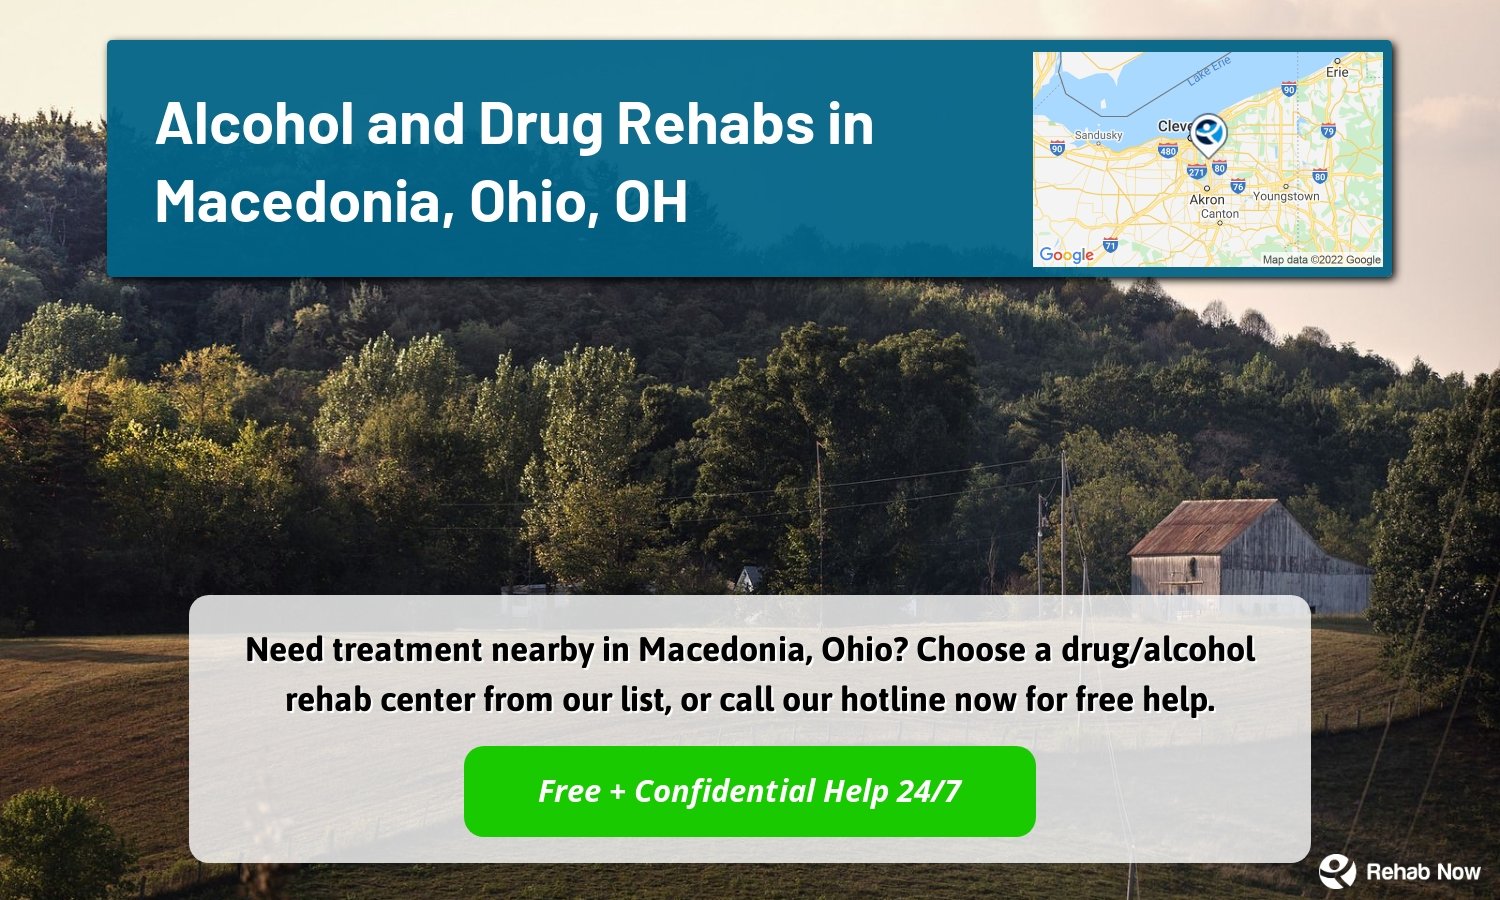 Need treatment nearby in Macedonia, Ohio? Choose a drug/alcohol rehab center from our list, or call our hotline now for free help.